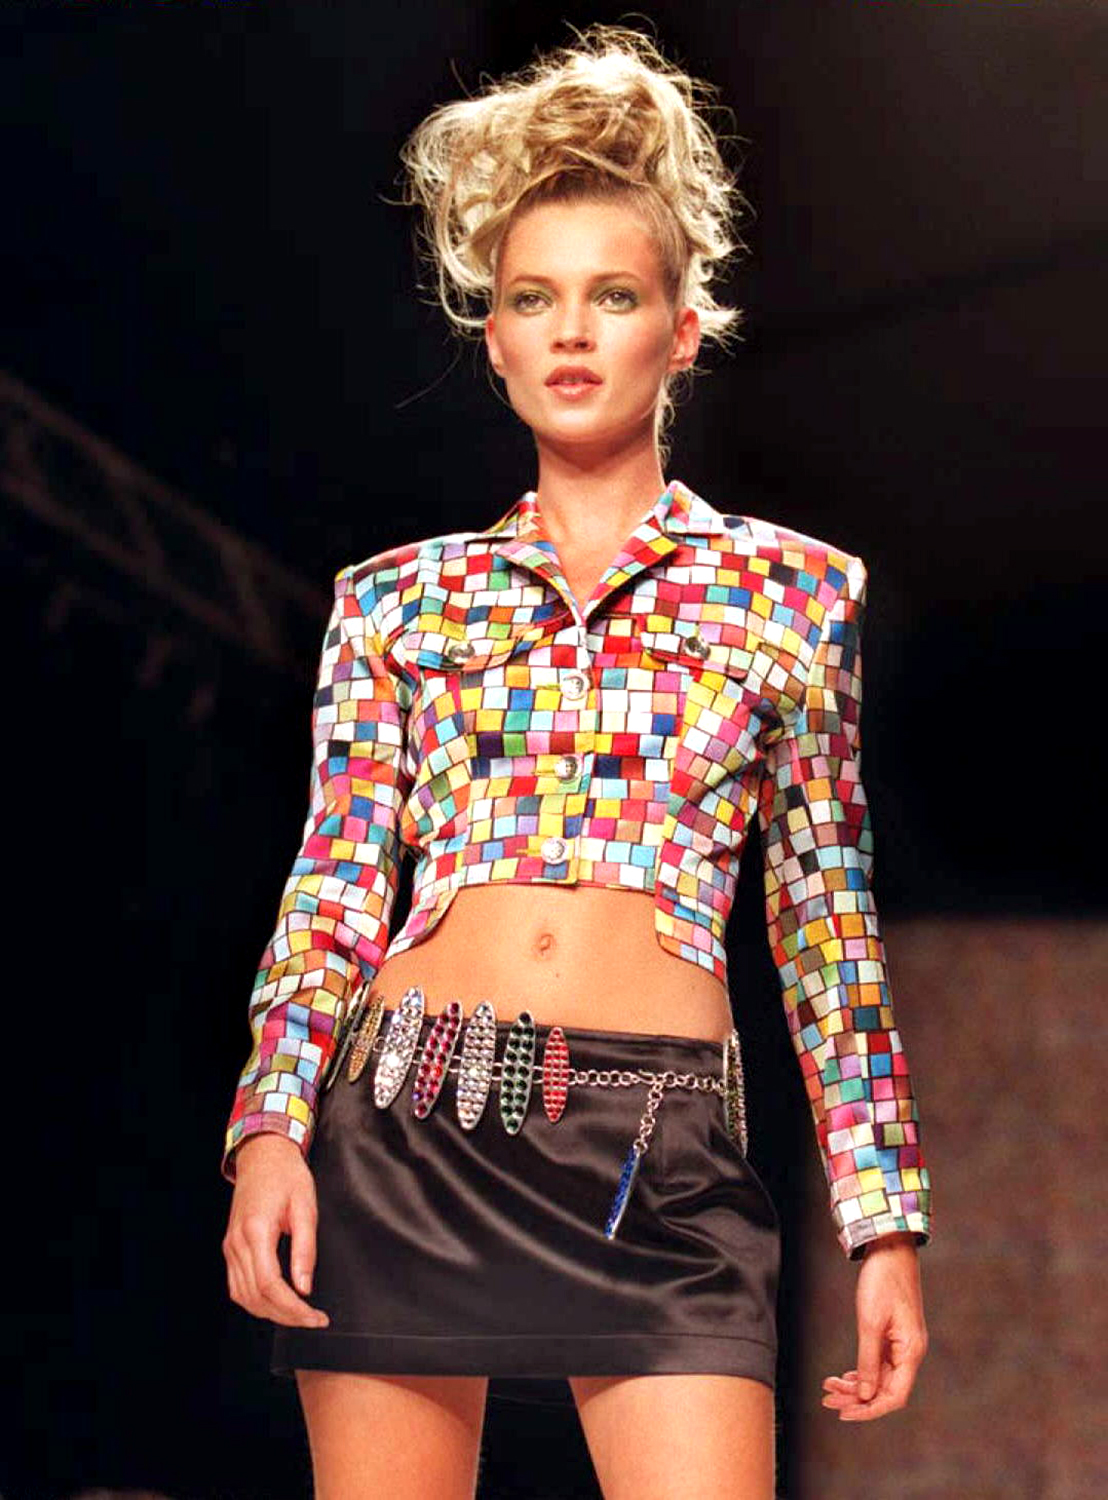 Catwalk queens: Supermodels of the '90s